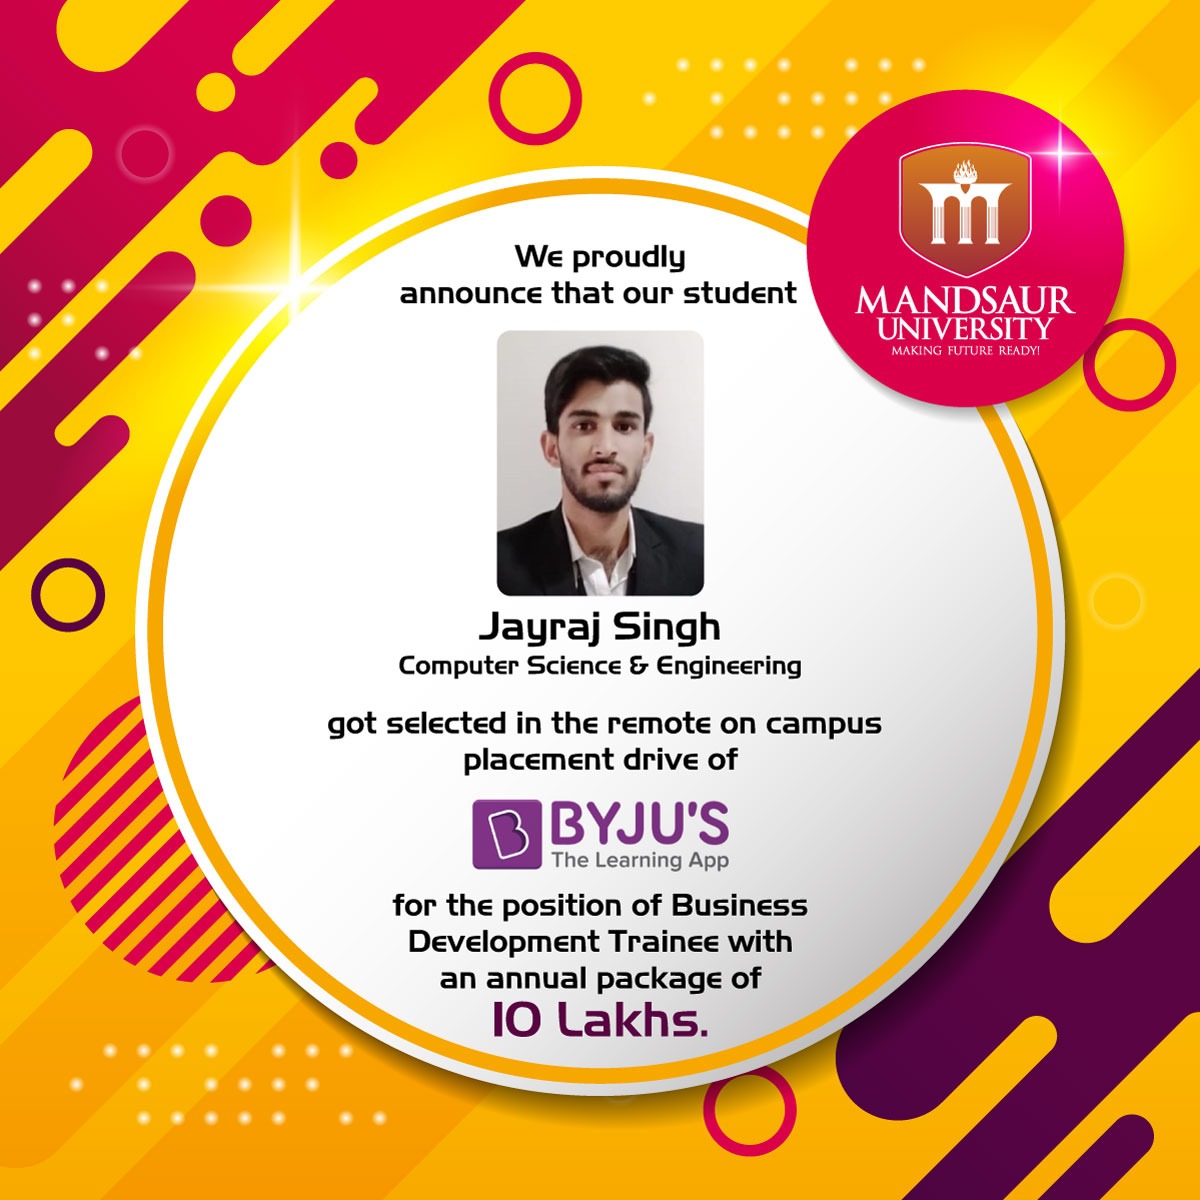 Mandsaur University proudly announces that our student of CSE got selected in the remote on-campus placement drive of BYJU’S